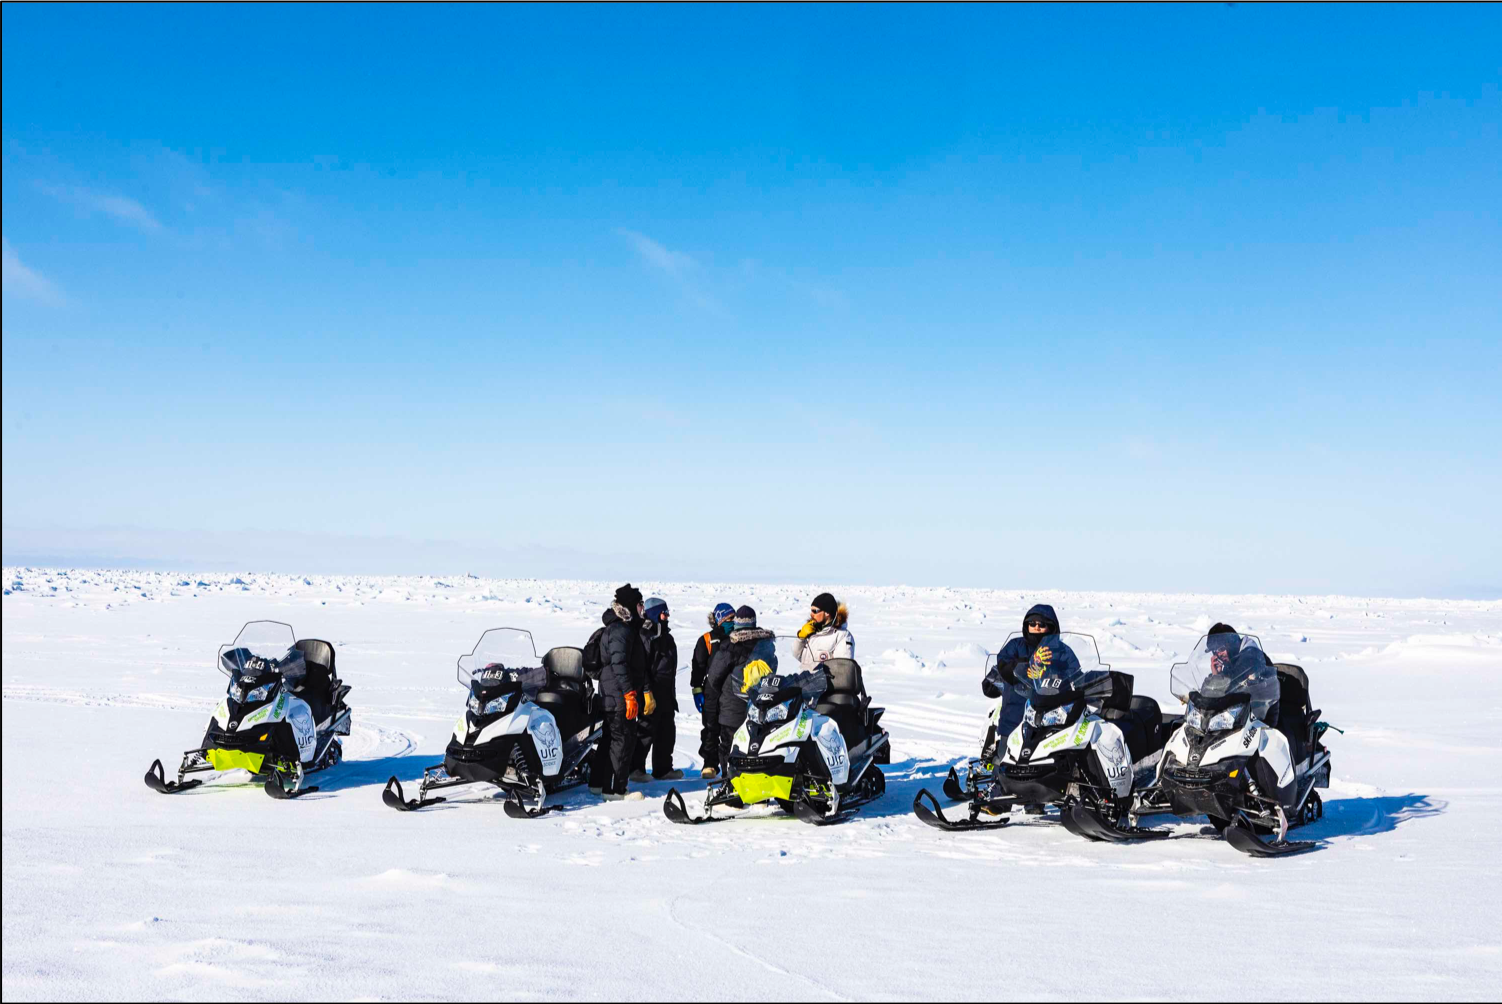 Scientists on snowmobiles